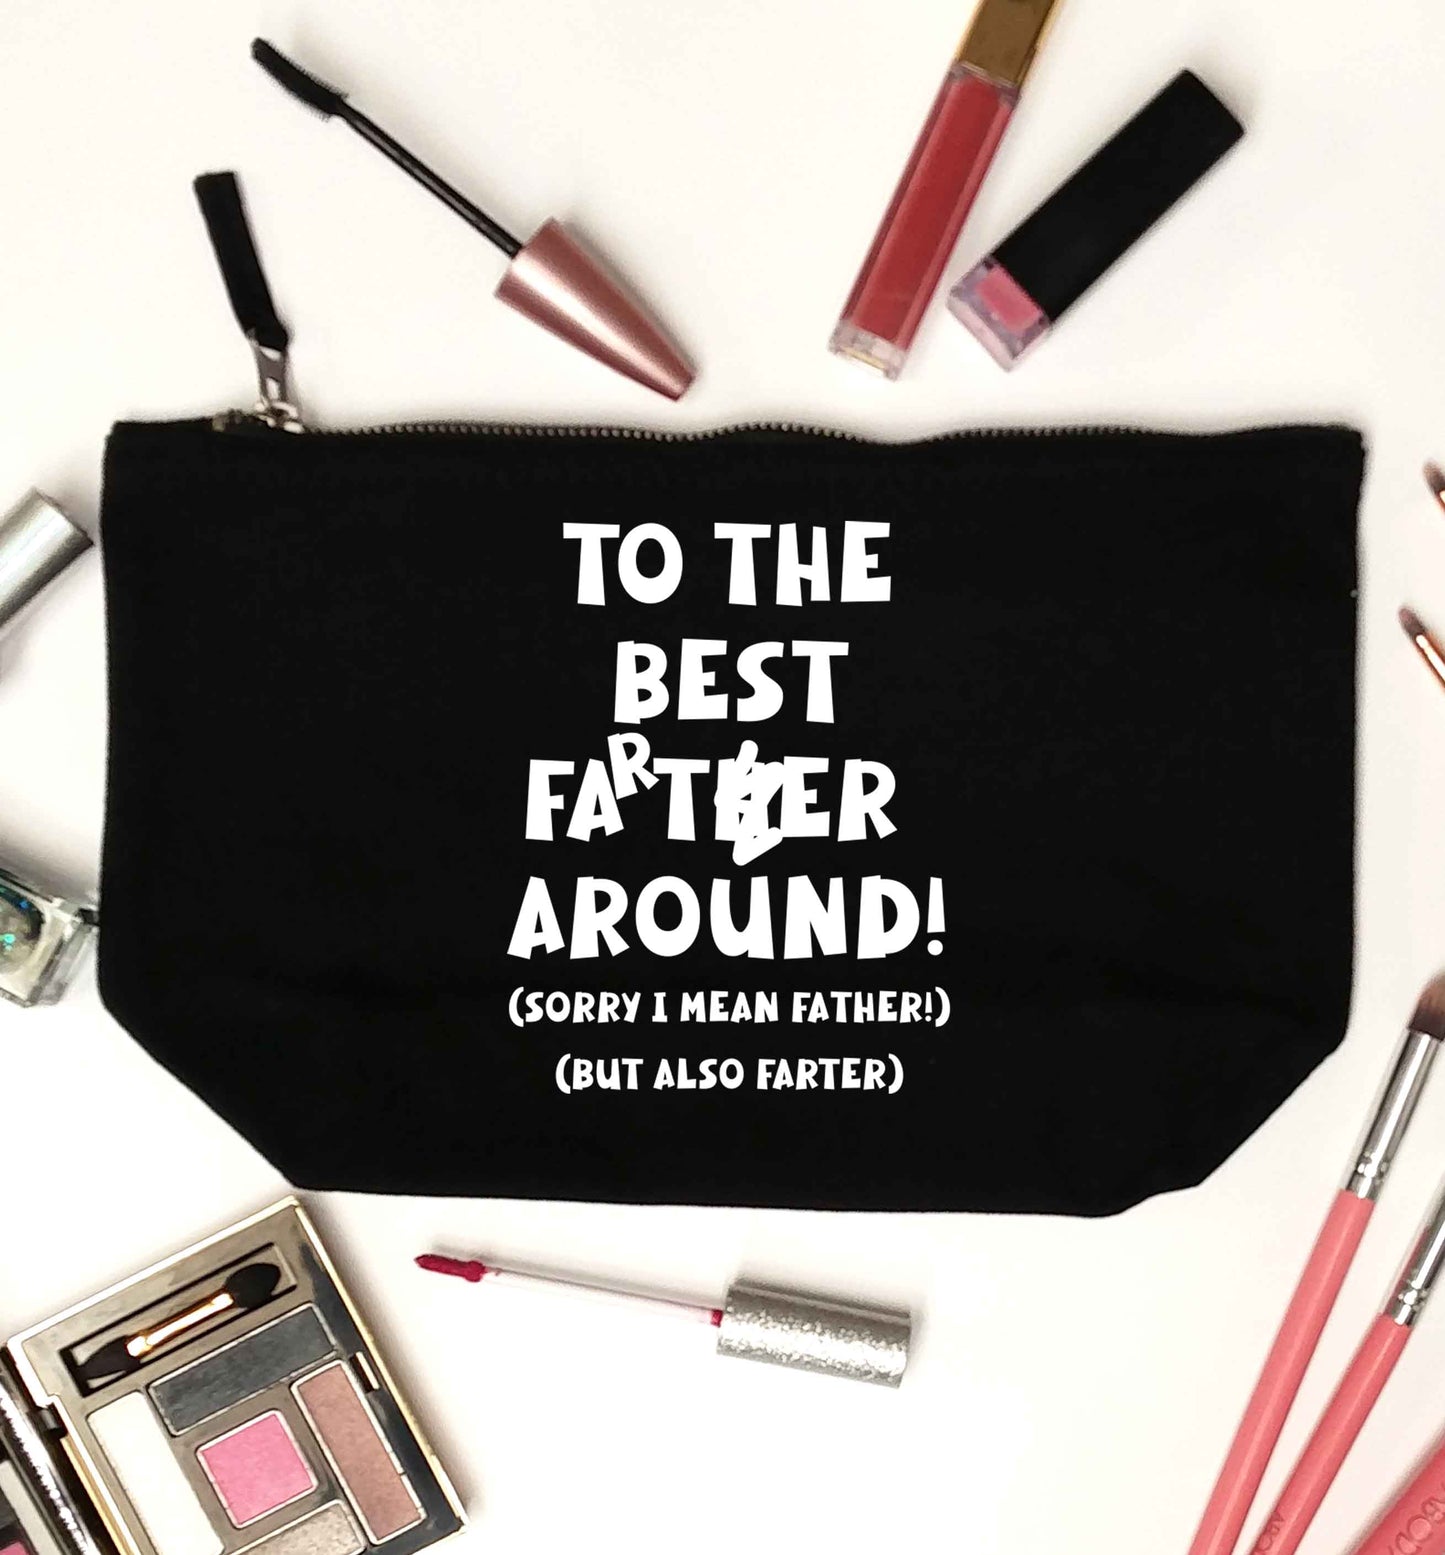 To the best farter around! Sorry I mean father, but also farter black makeup bag